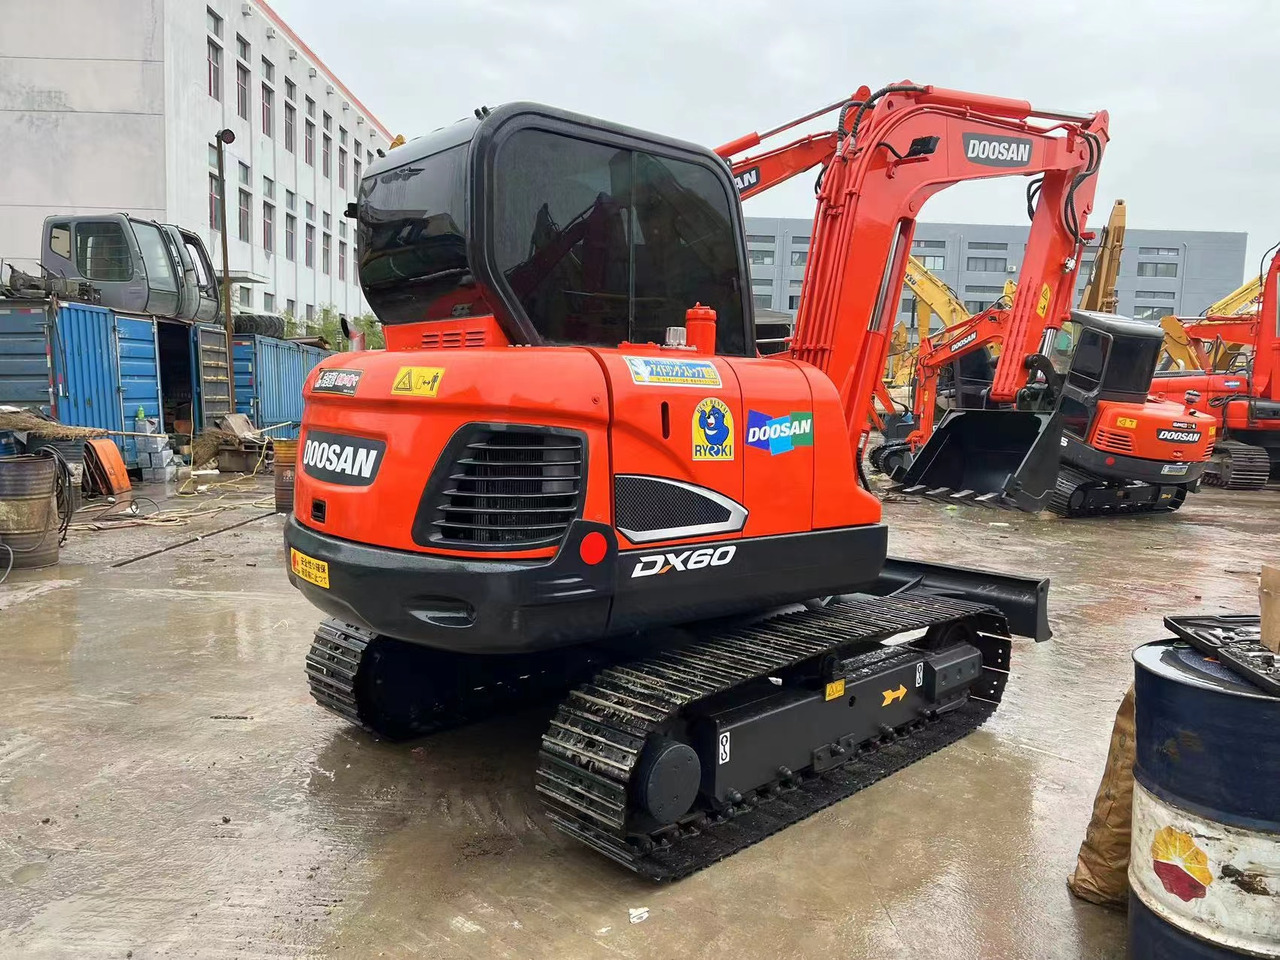 Rupsgraafmachine High quality DOOSAN used excavator DX60 strong power hot selling !!!: afbeelding 2